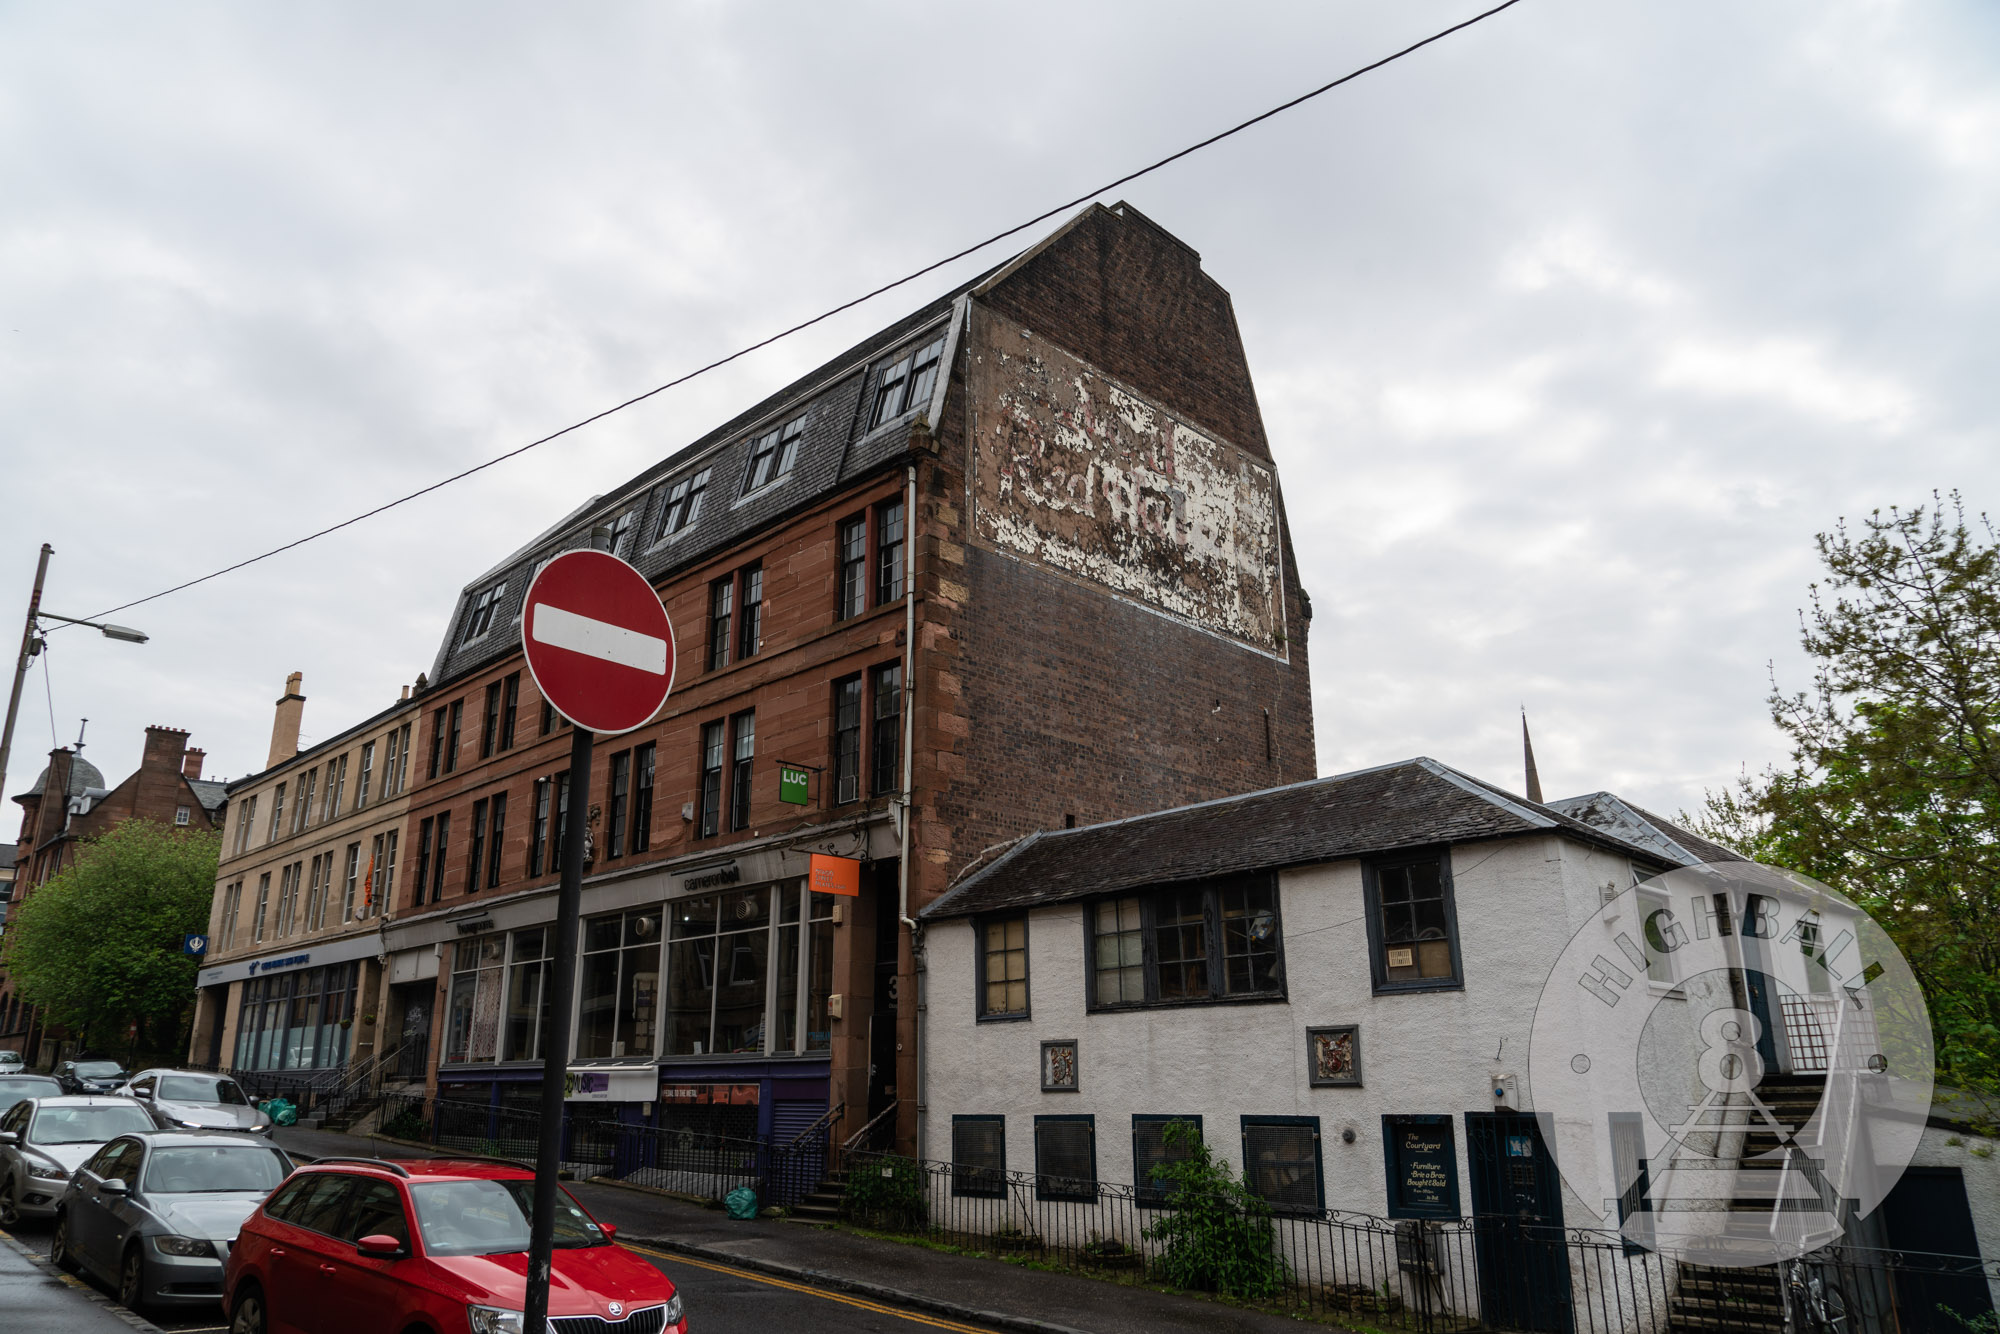 Traces of an old sign painted onto the side of a building off of the Great Western Road, Kelvinbridge, Glasgow, Scotland, UK, 2018.